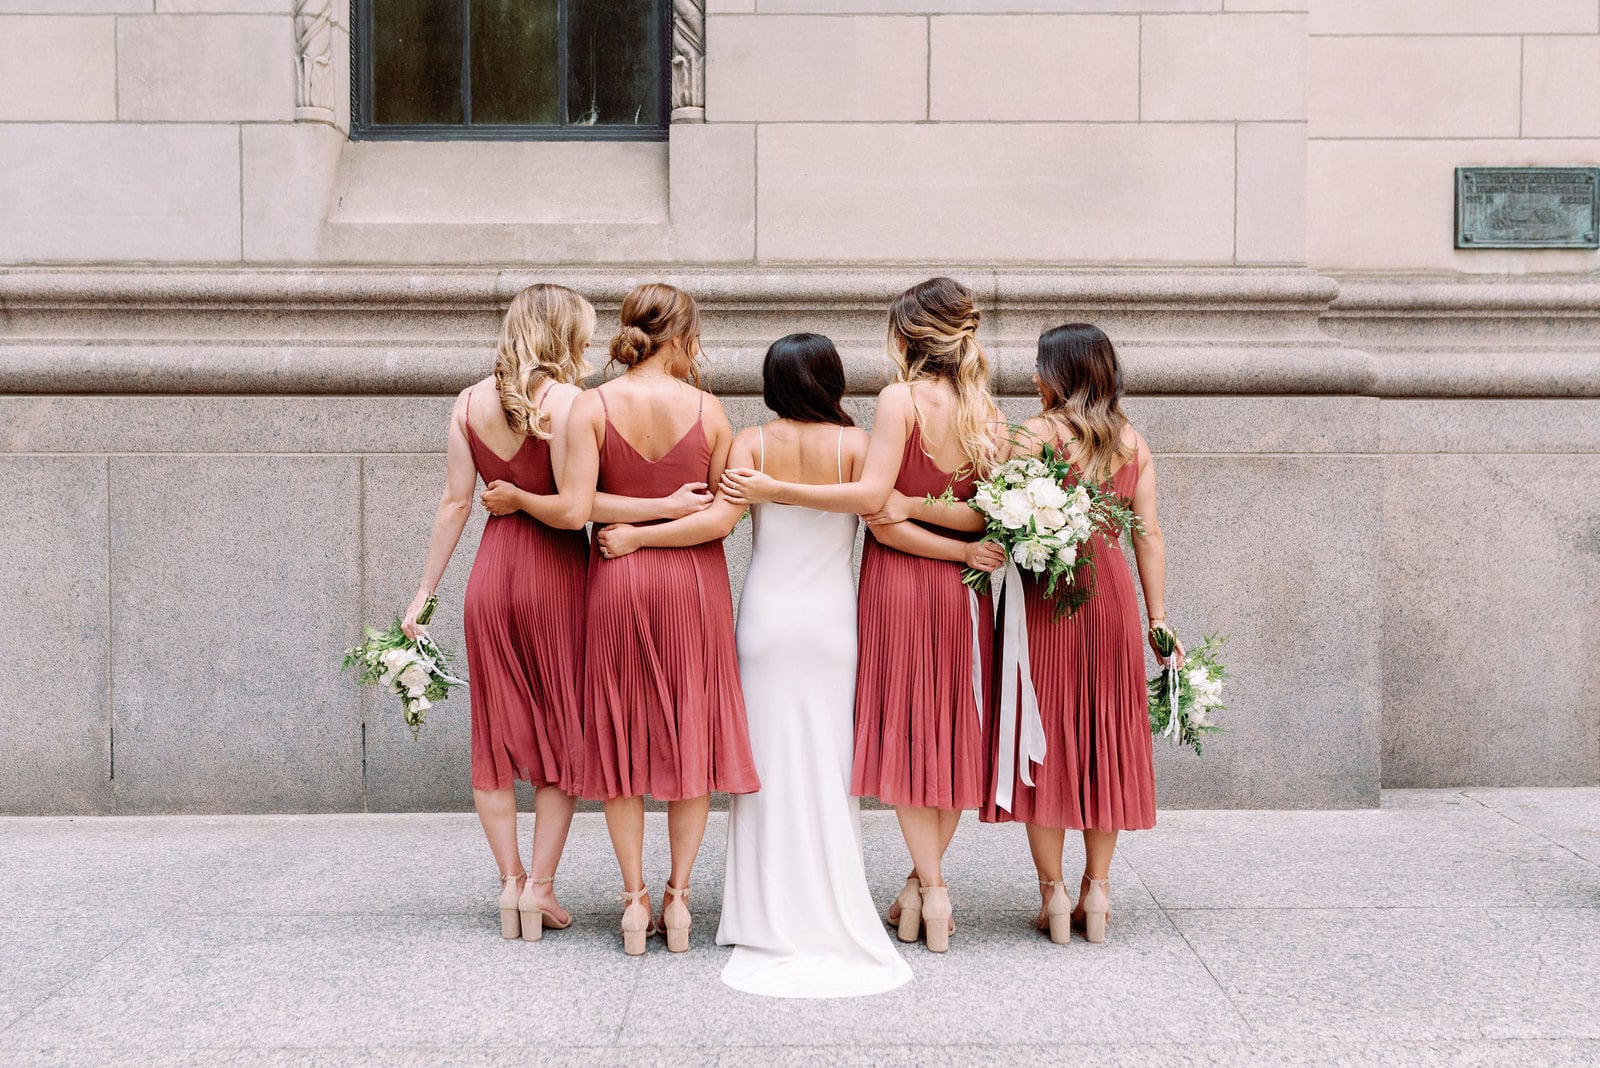 Editorial Bridesmaids Bridal Party wearing Aritzia Dresses in Financial District Downtown Toronto Wedding Photographer Jacqueline James Photography